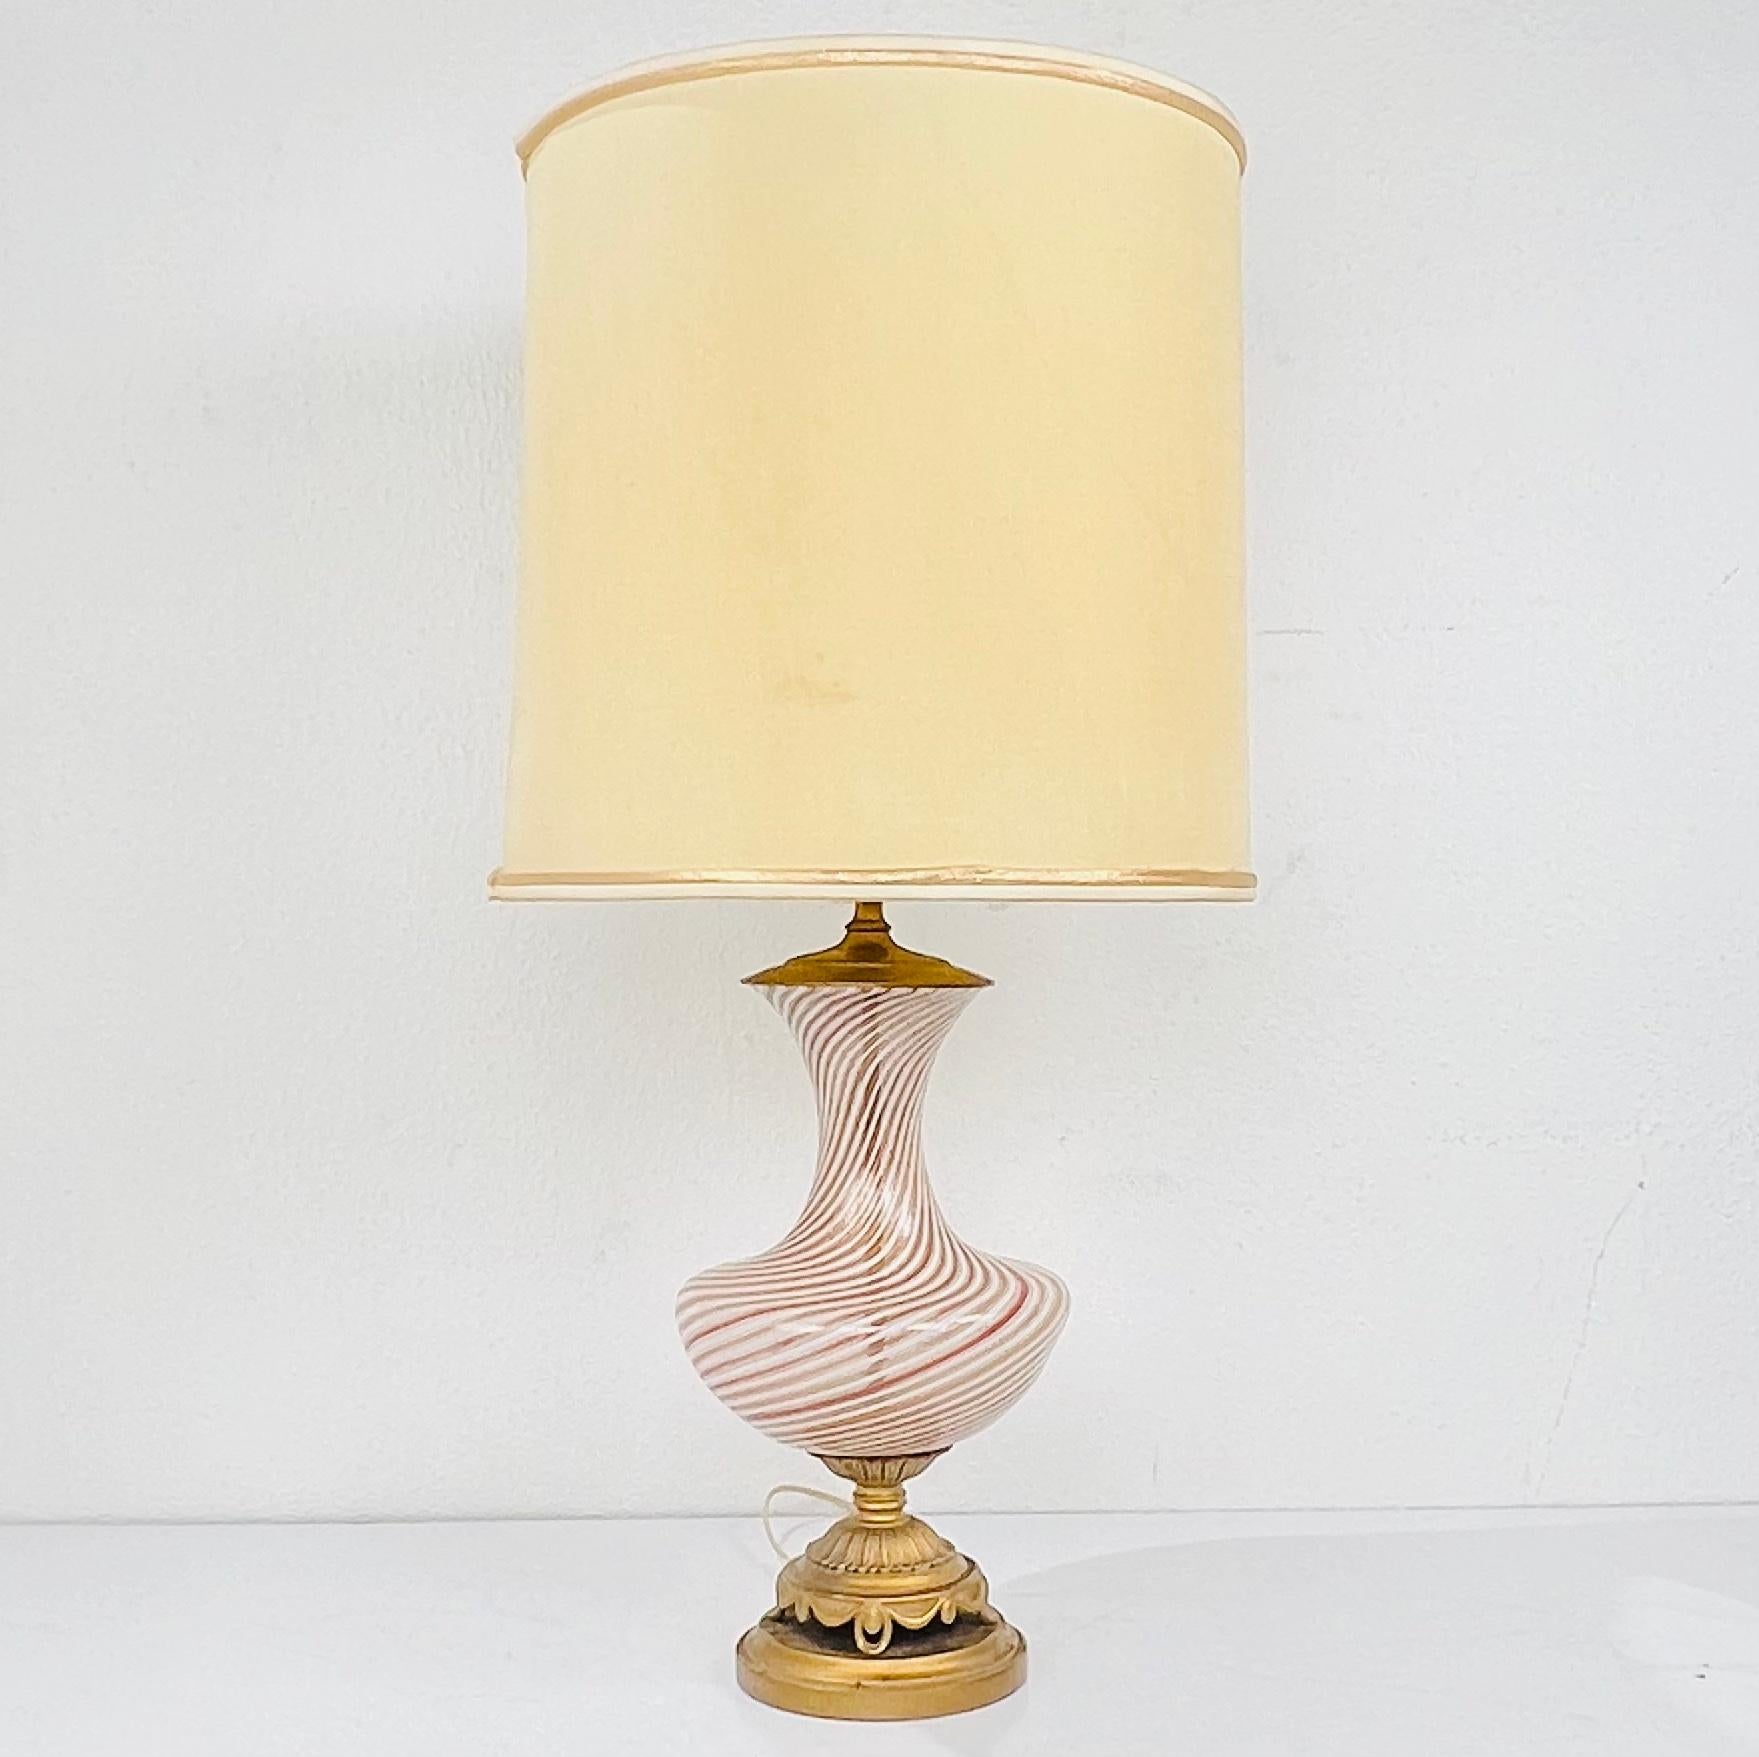 Chic antique hand-blown Murano glass table lamp by Dino Martens. In good, original, clean and working condition. Made in Italy. Wired for US. Shade not included.